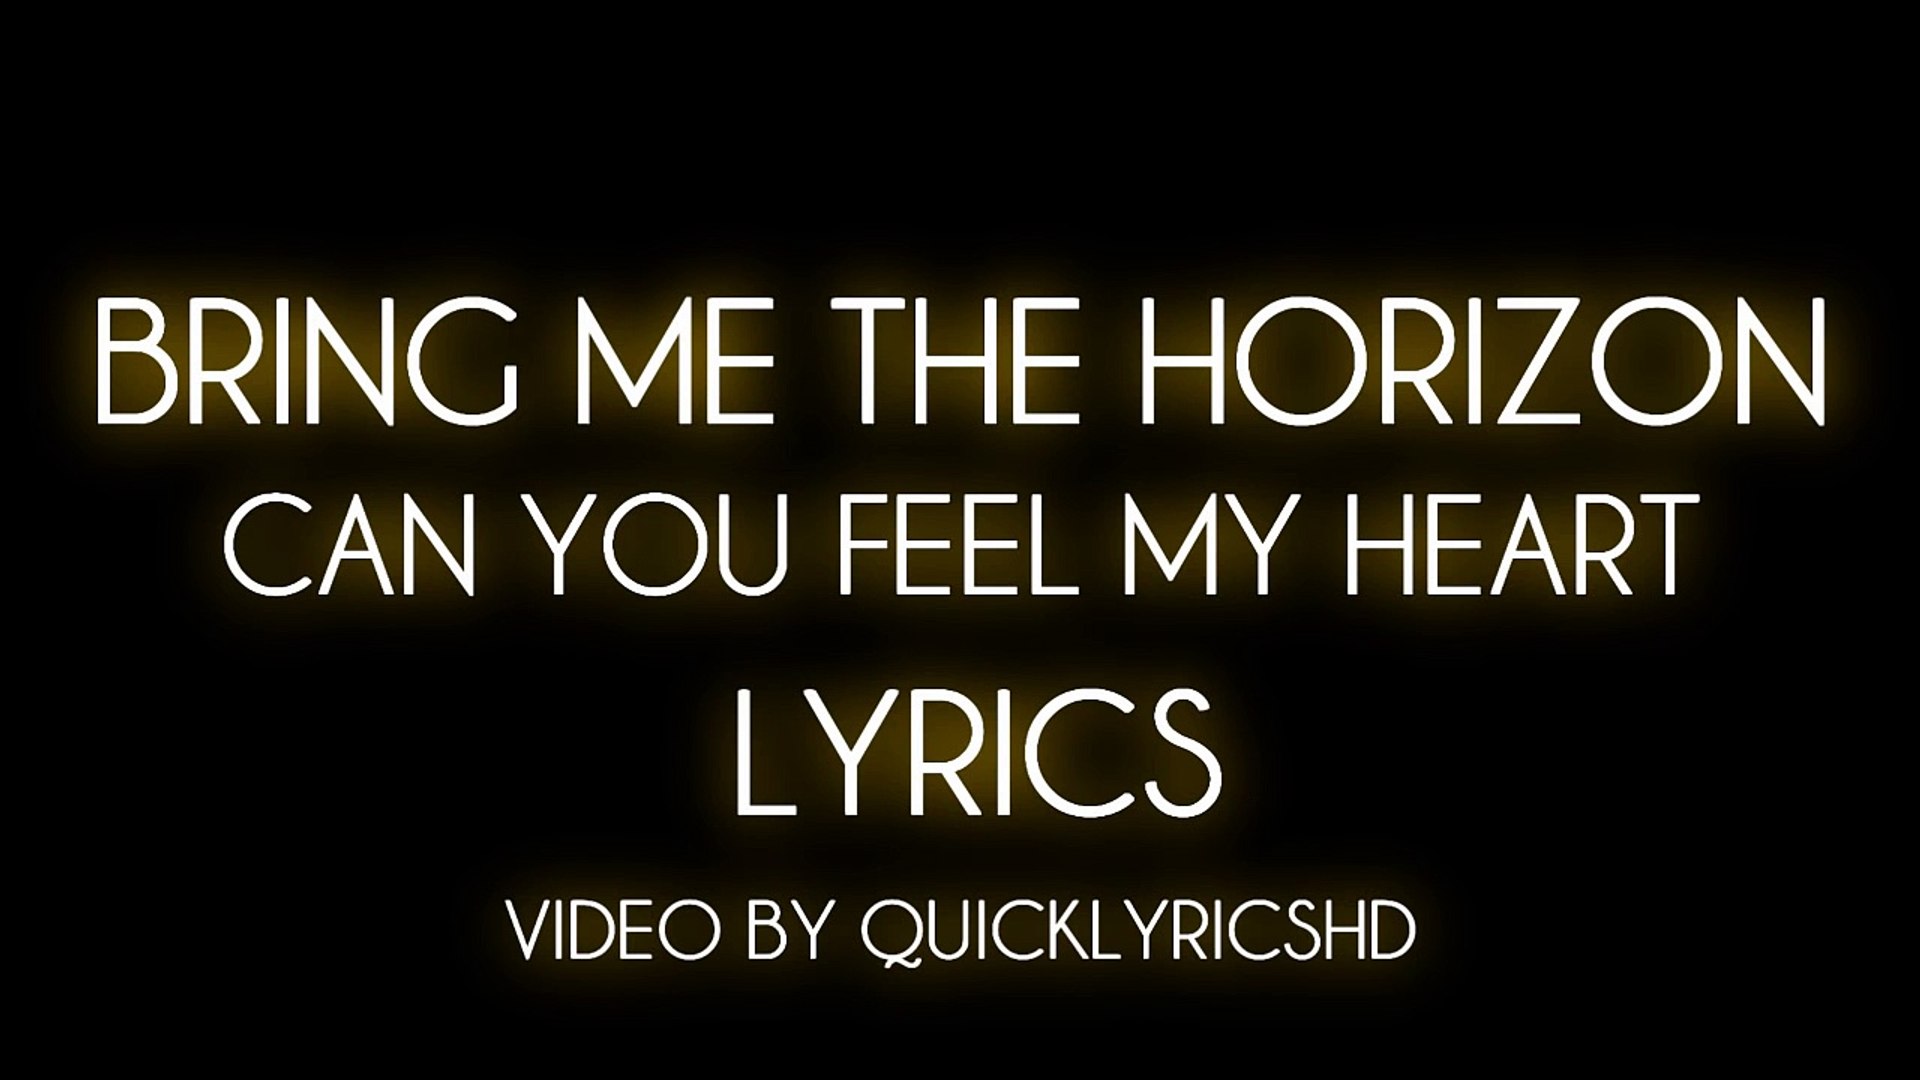 Фф can you feel my. Bring me the Horizon can you feel my Heart. Bring the Horizon can you feel my Heart текст. Bring me the Horizon текст. Bring me the Horizon can you feel my.